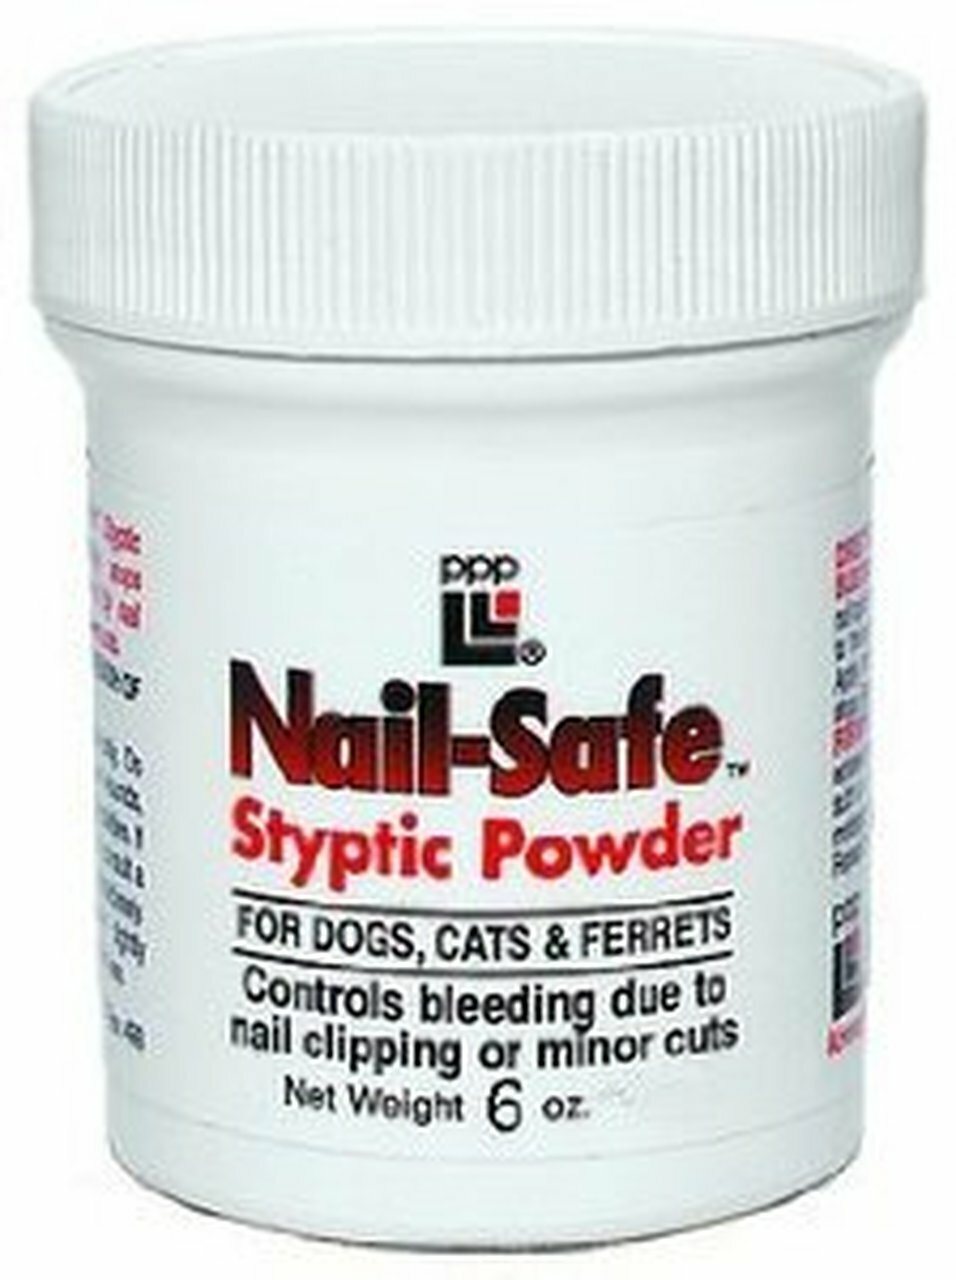 Ppp Nail Safe Styptic Powder 6 Oz Groomers Choice